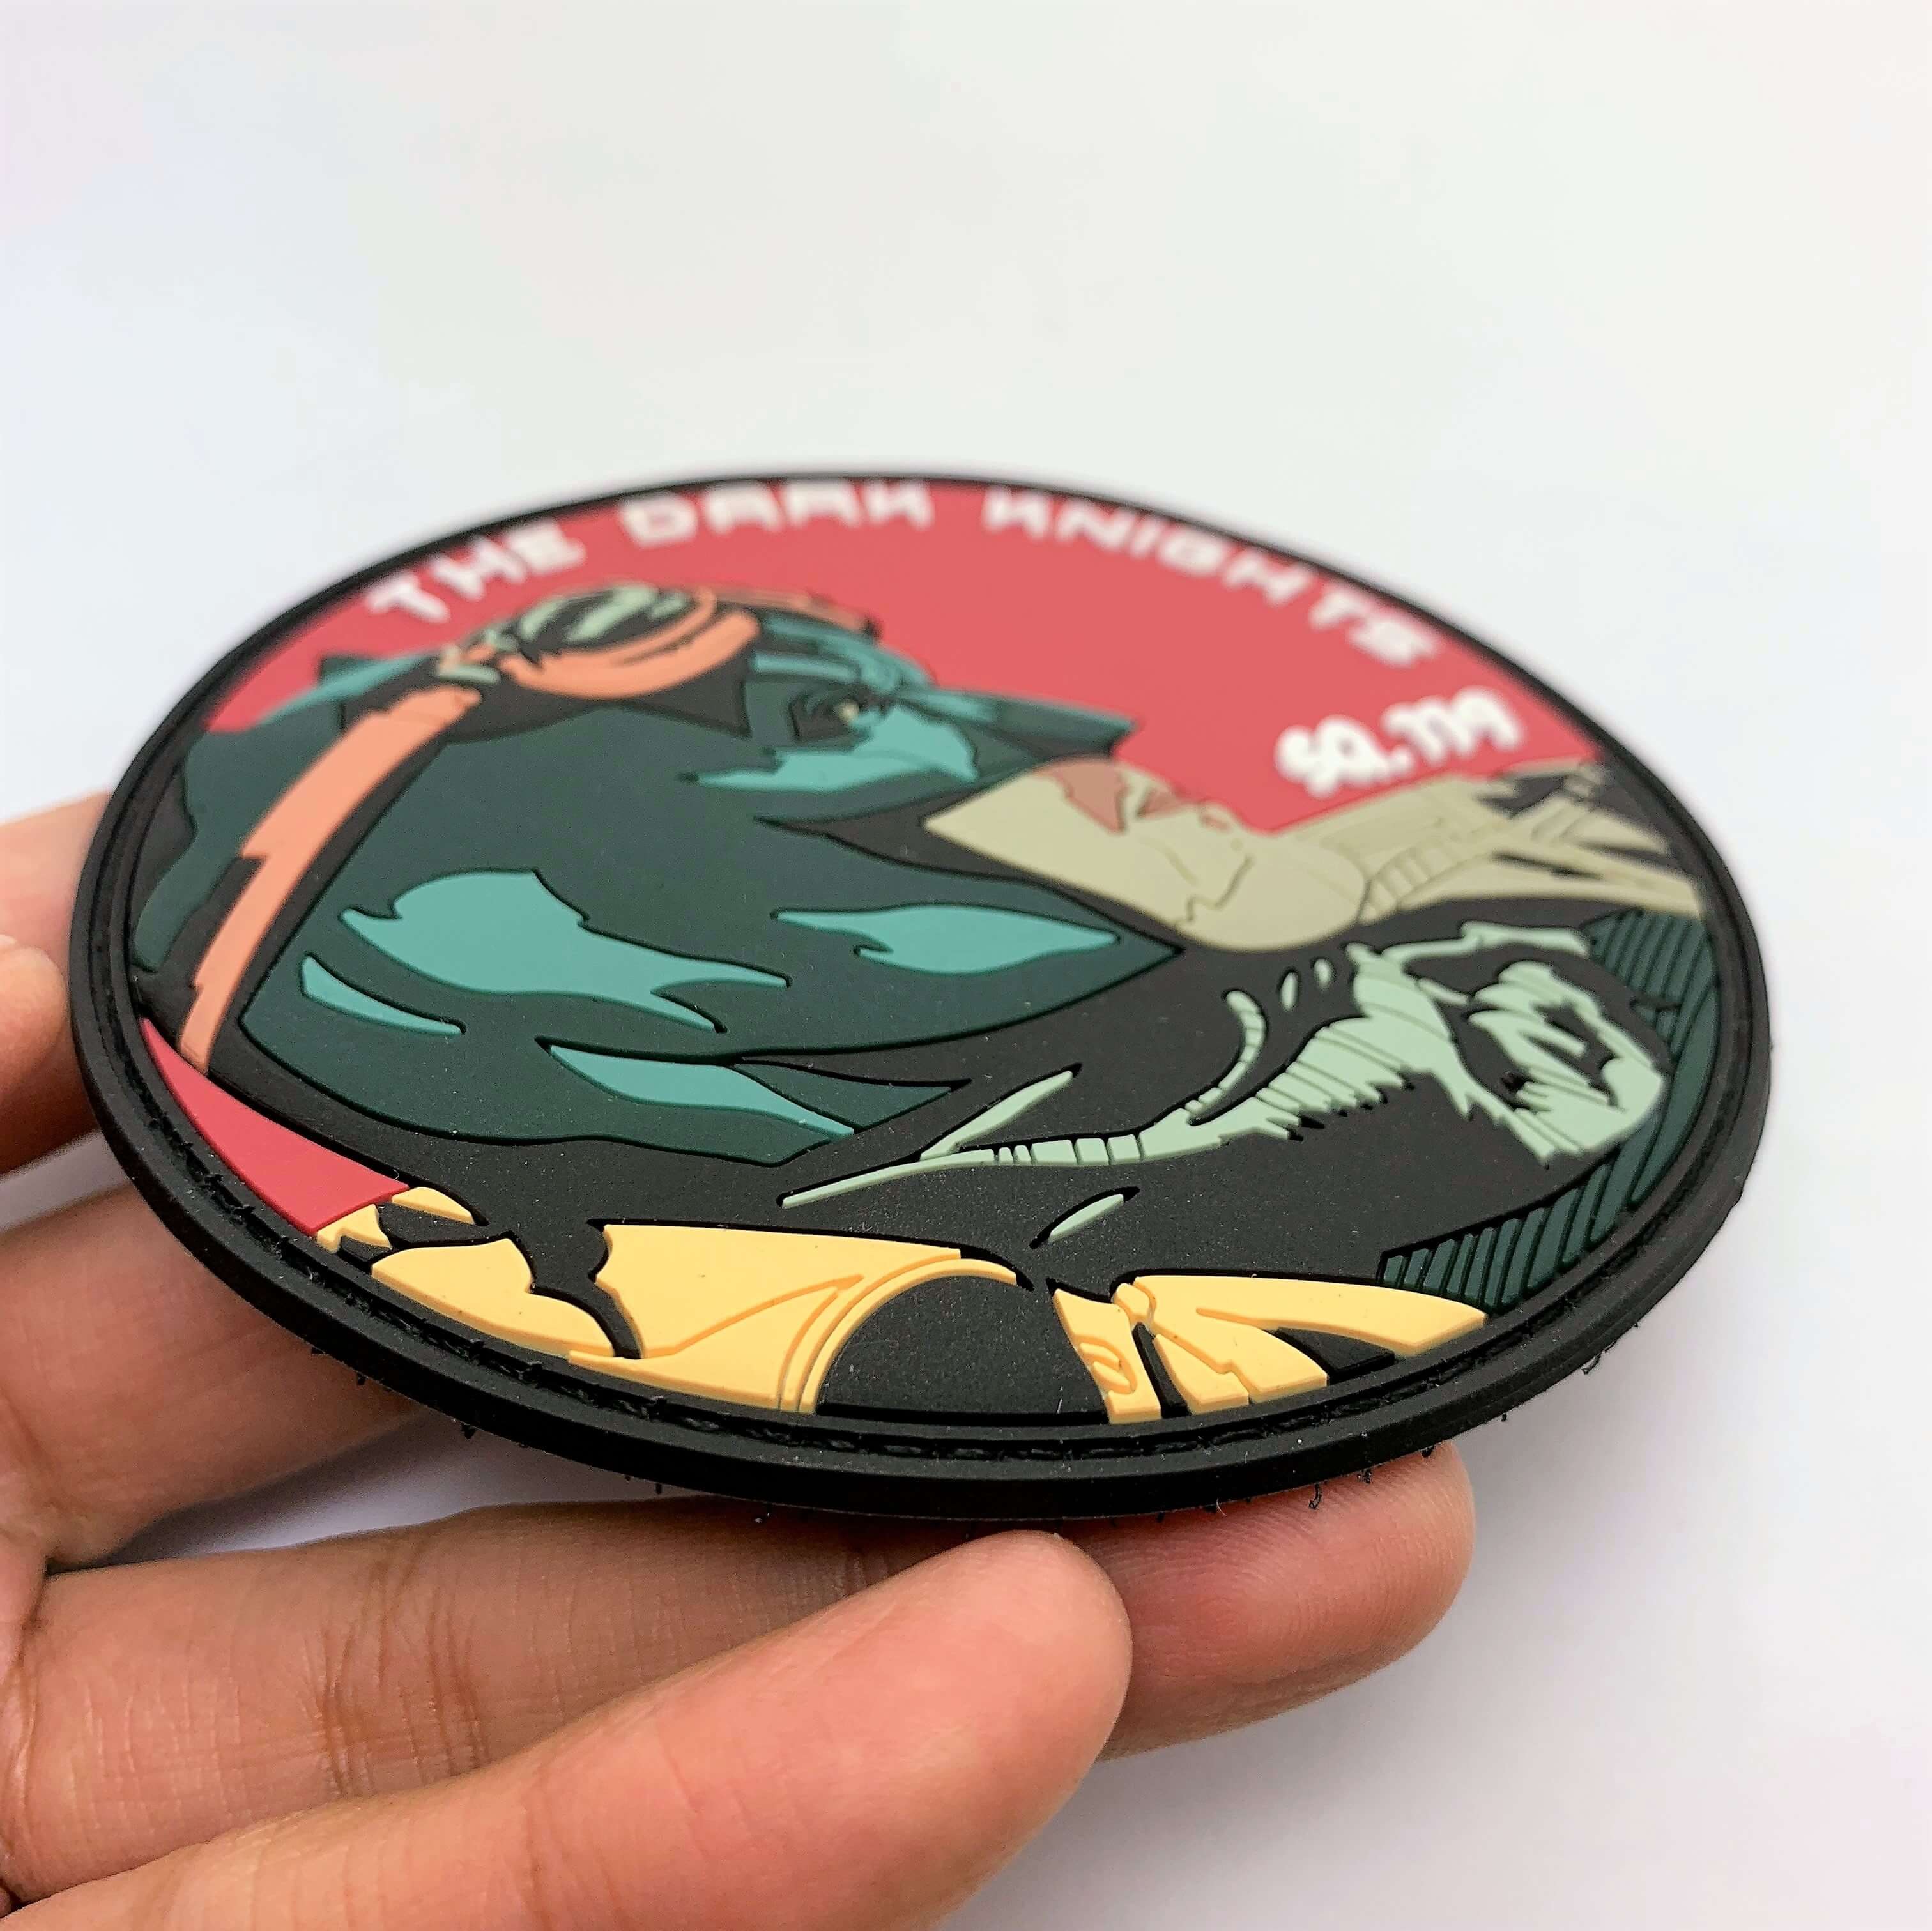 Custom PVC Patches - Manufacturer